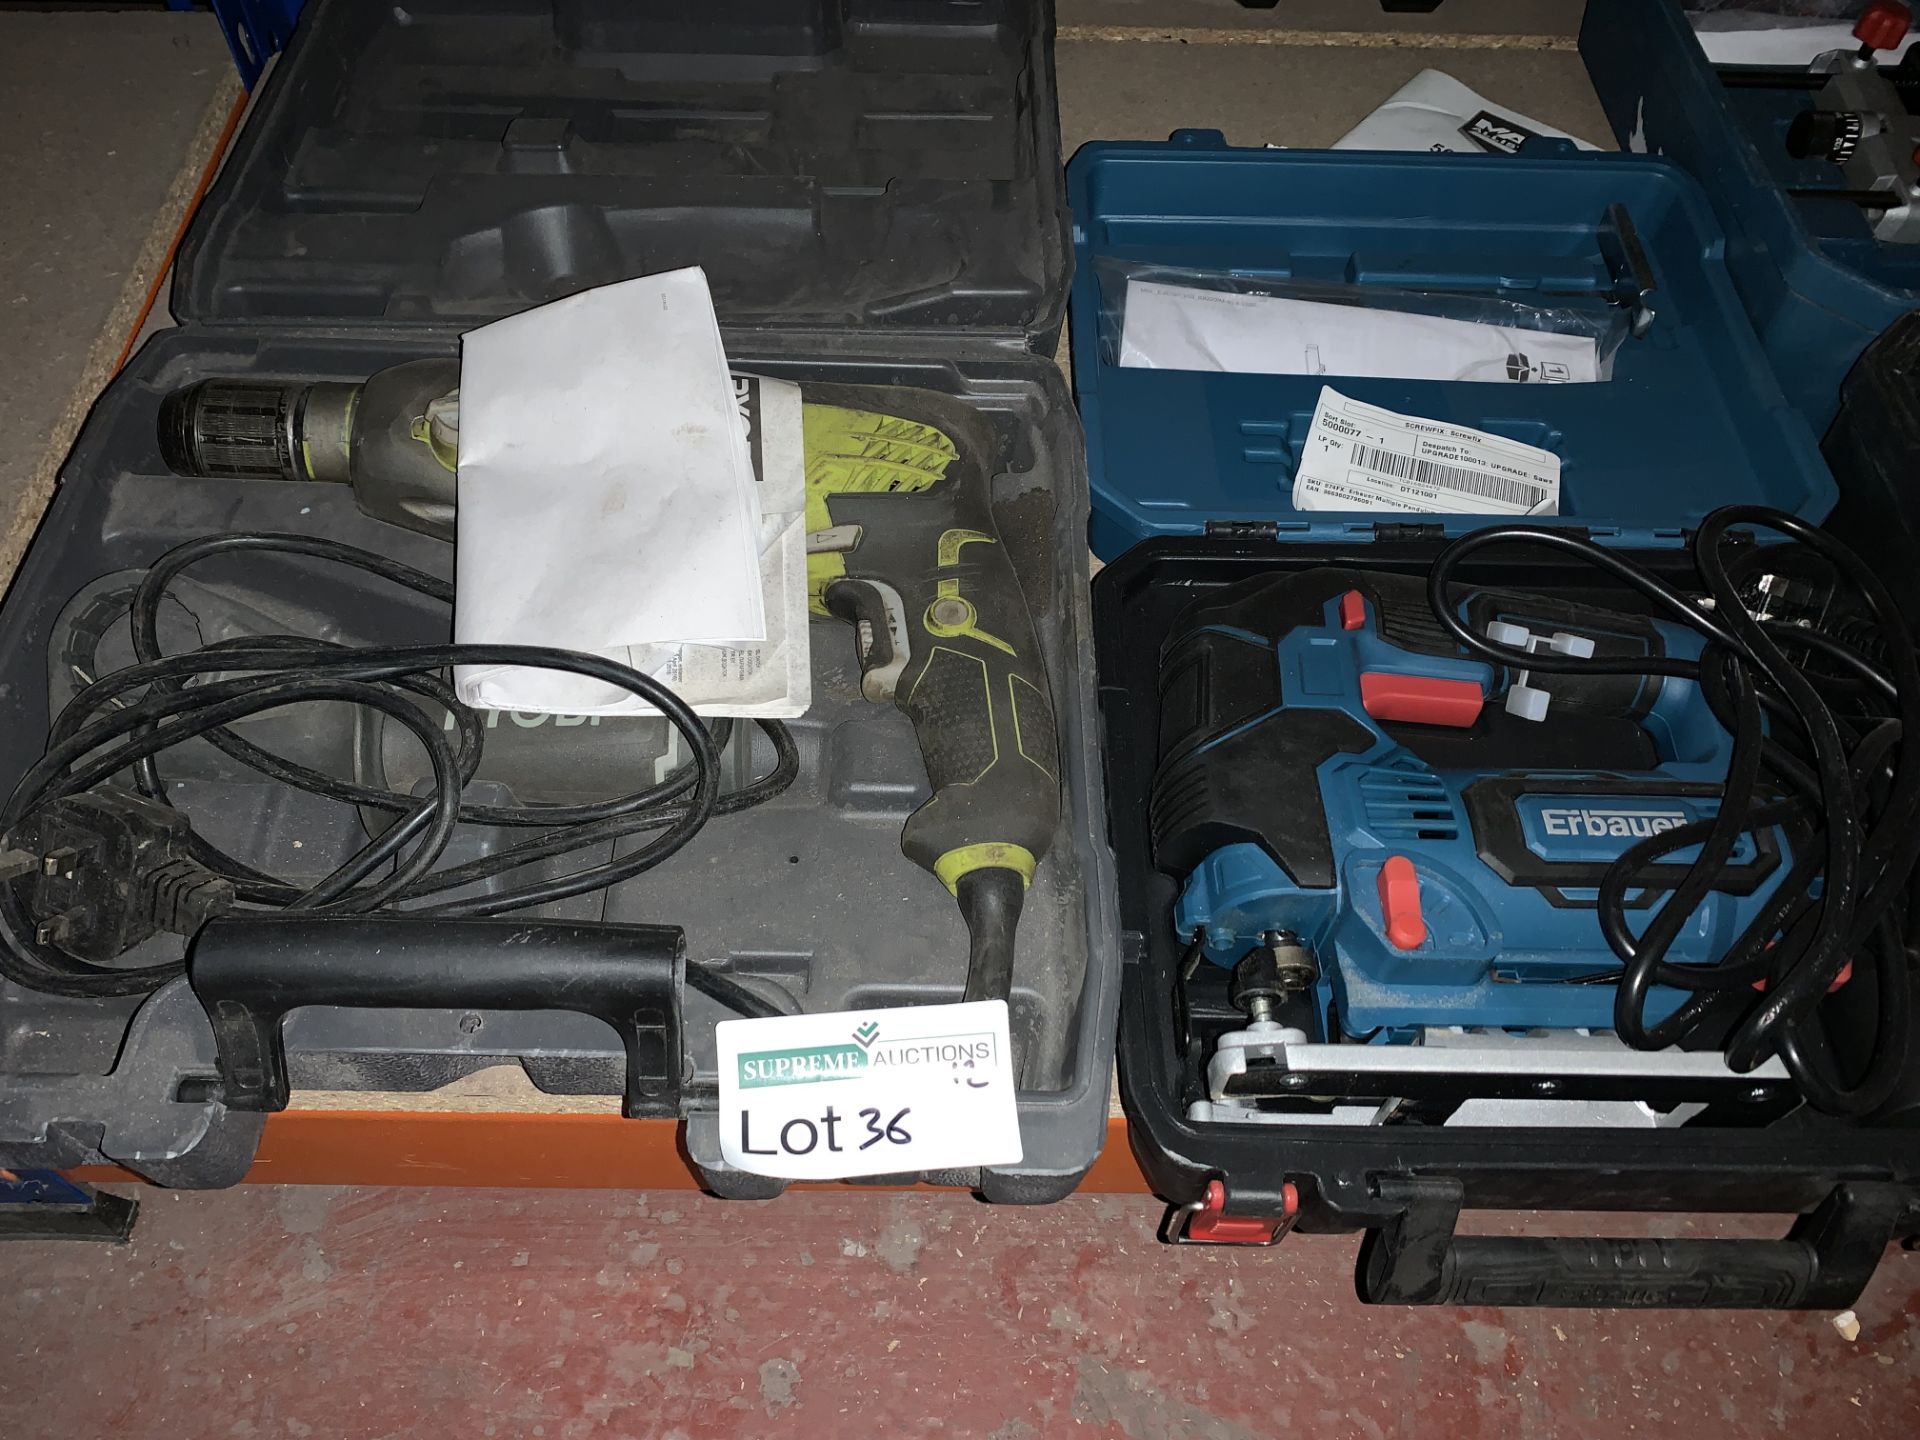 TOOL LOT INCLUDING RYOBI SDS DRILL AND ERBAUER JIGSAW COMES WITH CARRY CASES (UNCHECKED, UNTESTED)